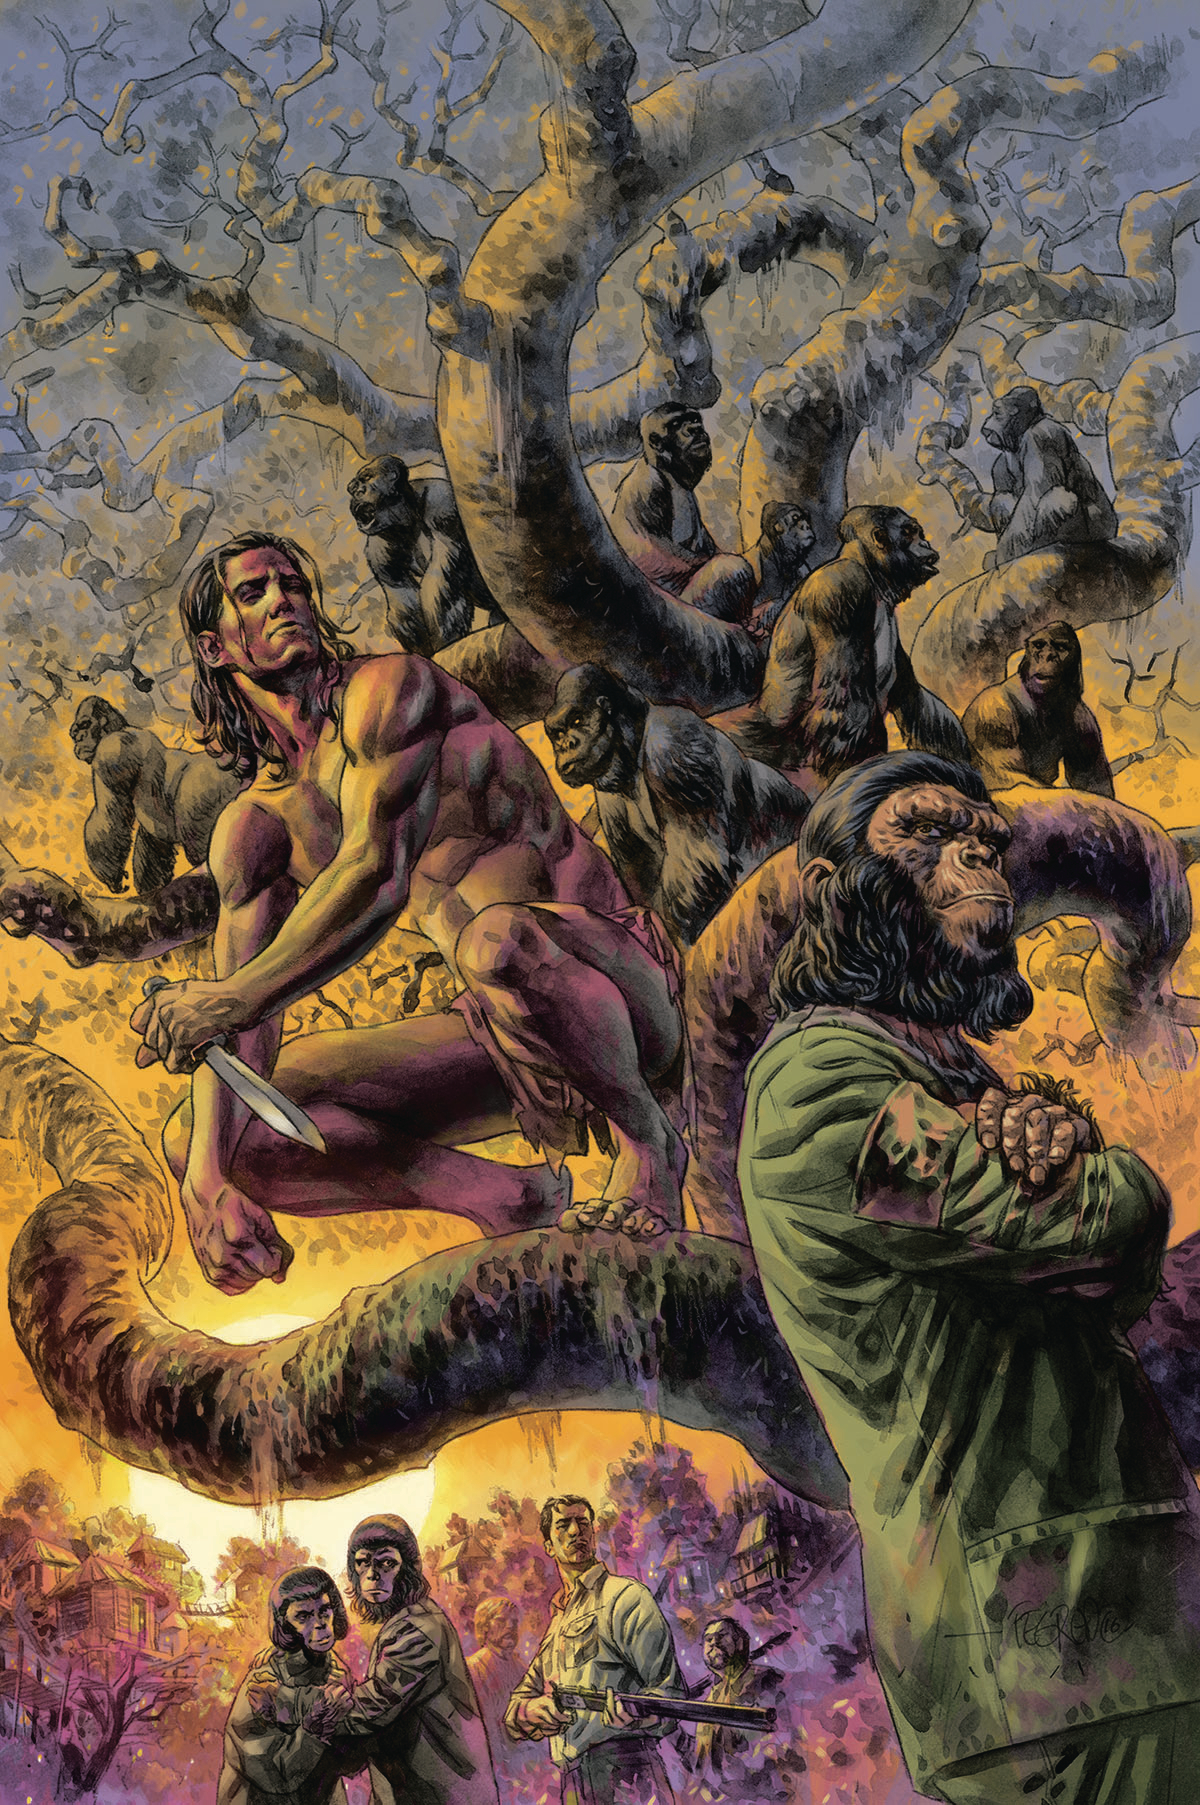 TARZAN ON THE PLANET OF THE APES #1 (OF 5)